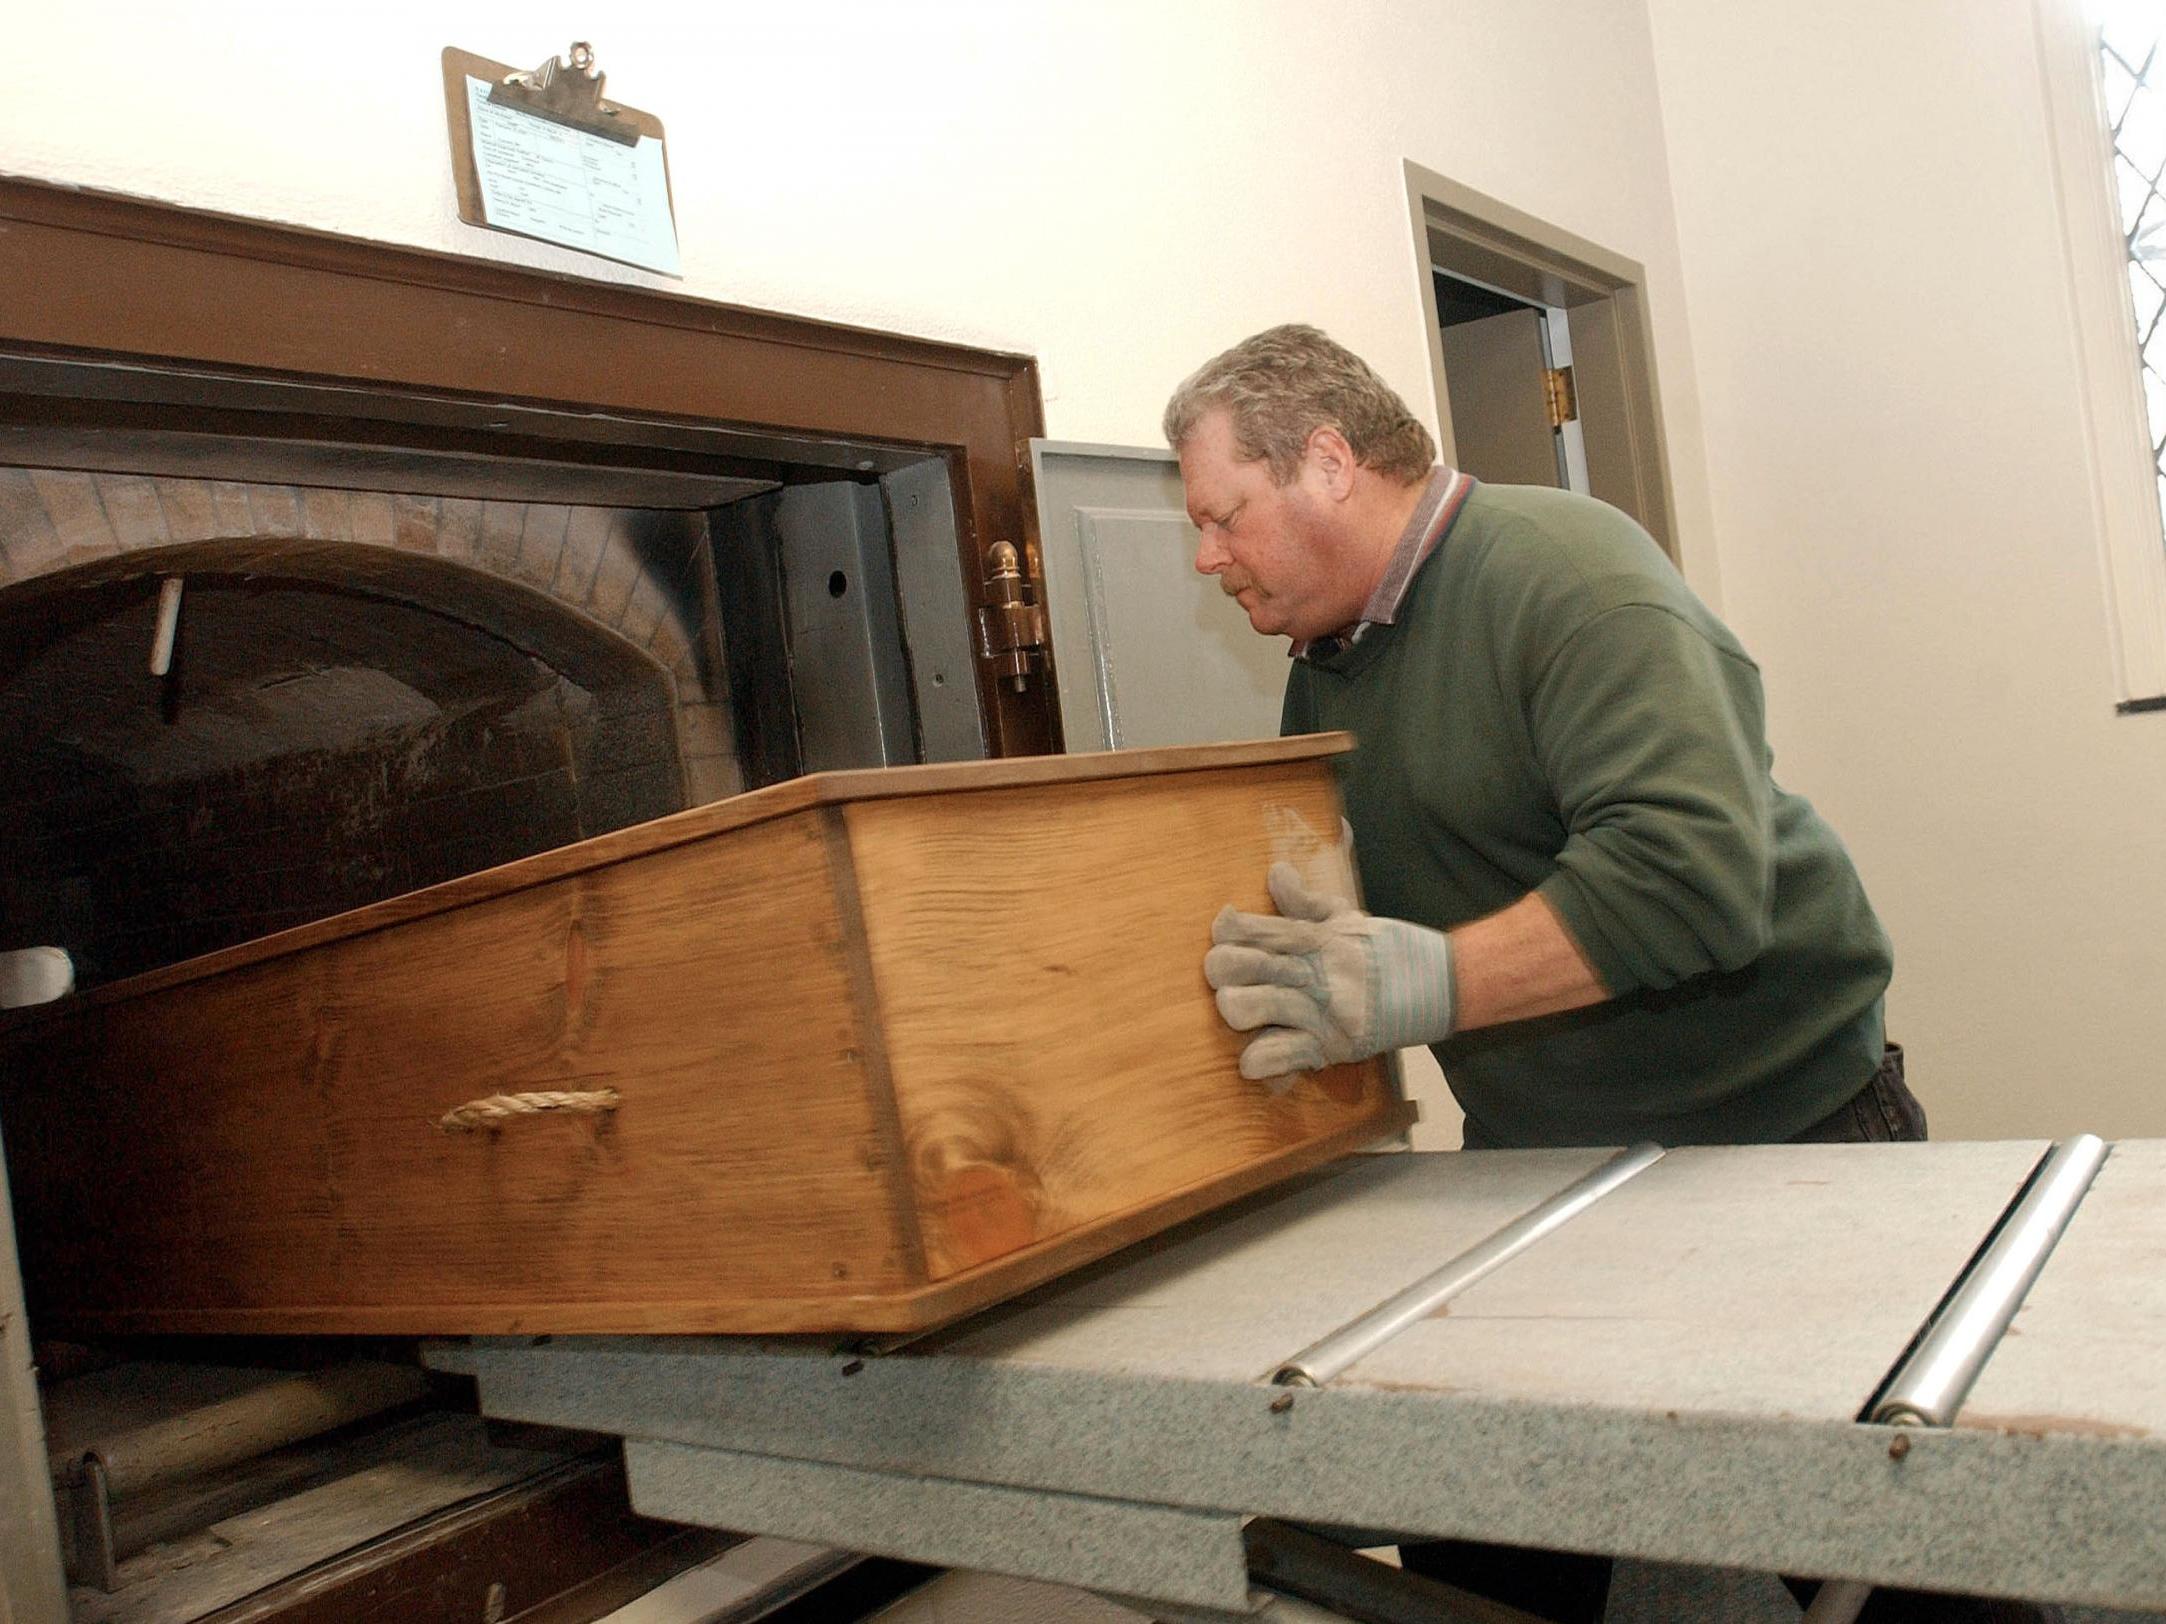 Crematory operator places a coffin into the retort, or cremation ovens, at Mount Auburn Cemetary in Watertown, MA.